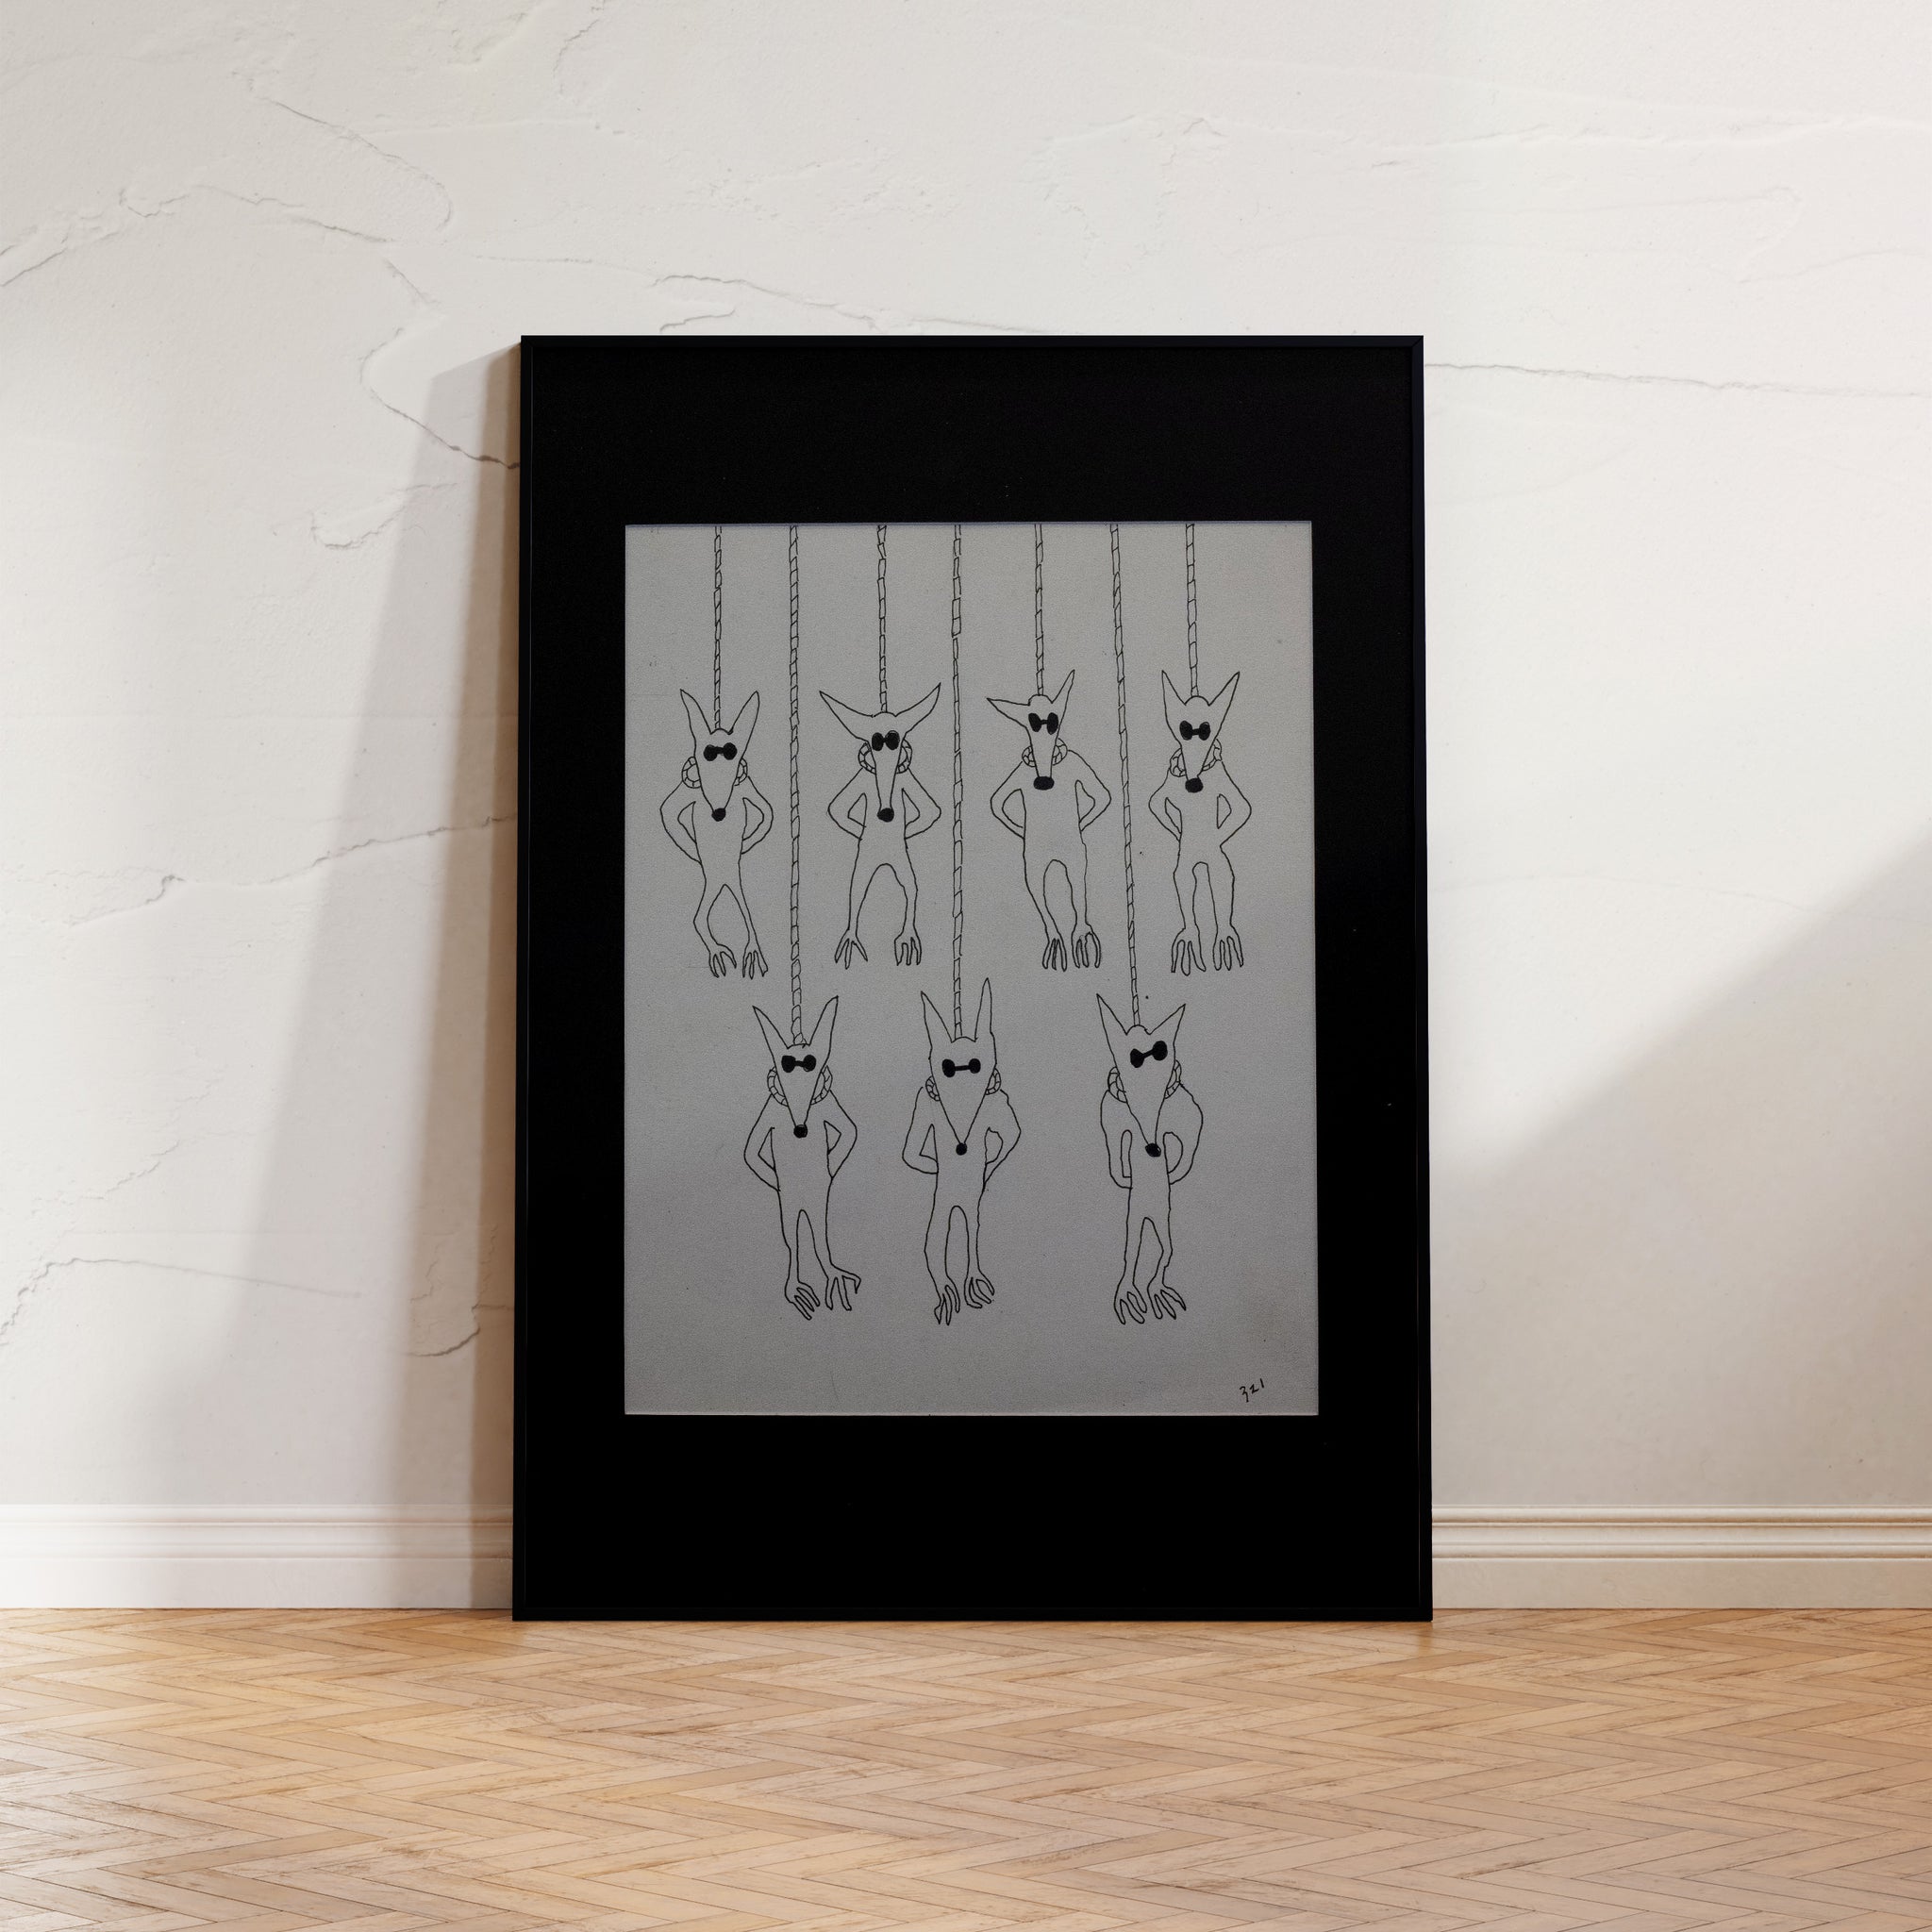 "Suspended Sentiments", Abstract black and white artwork featuring whimsical dog figures intertwined with poignant symbols, evoking emotions and introspection.